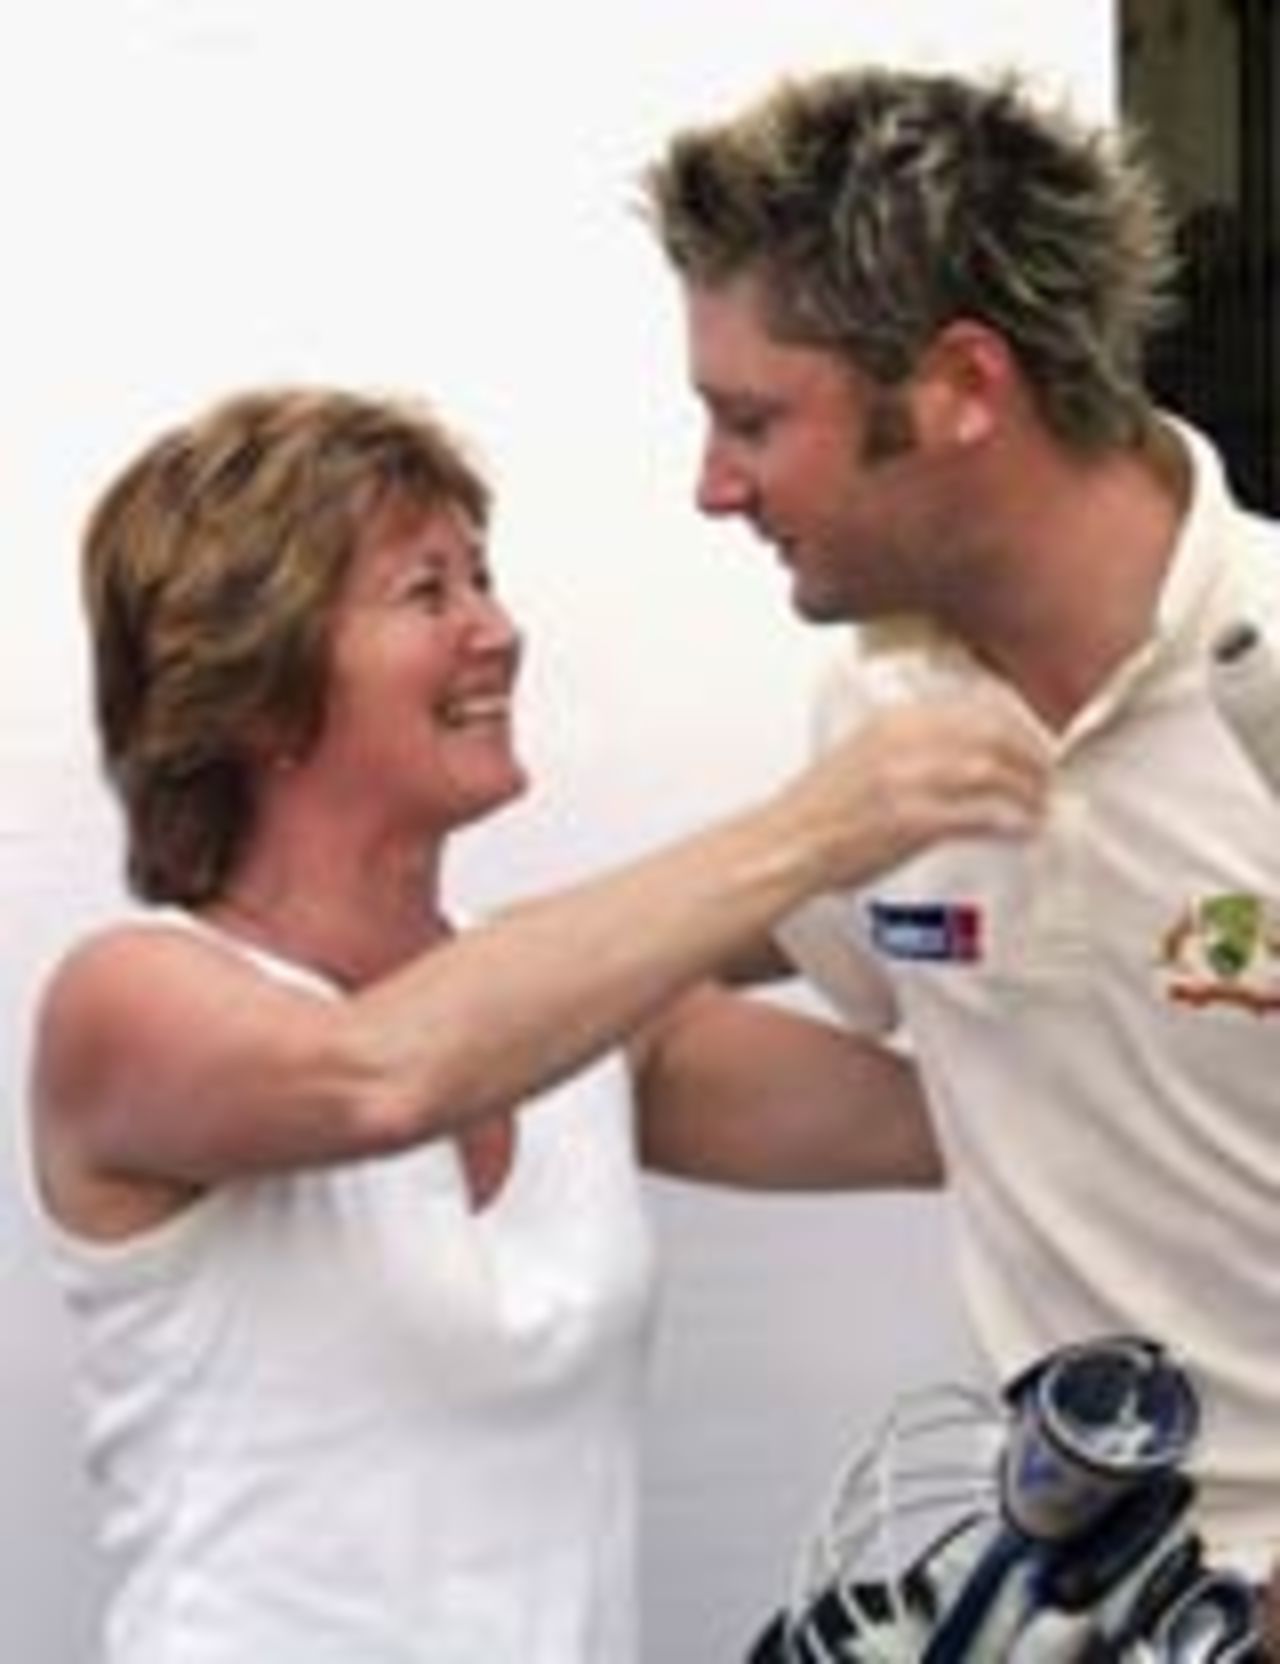 Debbie Clarke hugs her son Michael after he scored a century on Test debut, Australia v India, 1st Test, Bangalore, 1st day, October 7, 2004